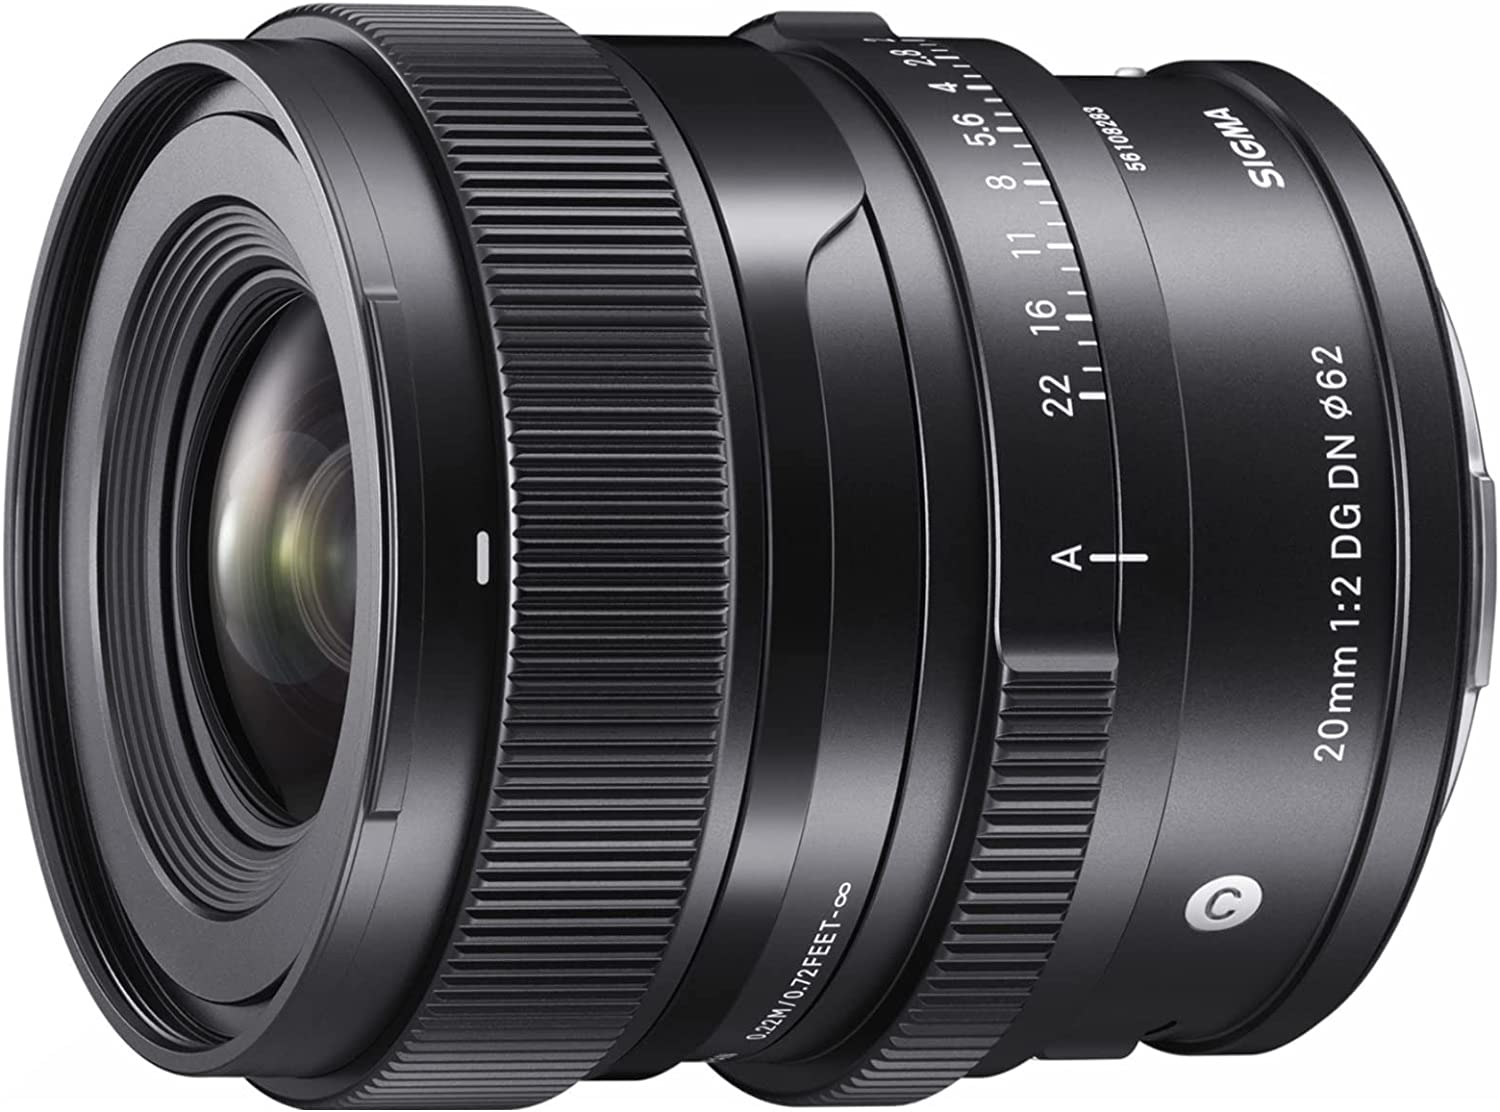 The Sigma 20mm F2 DG DN Contemporary Review